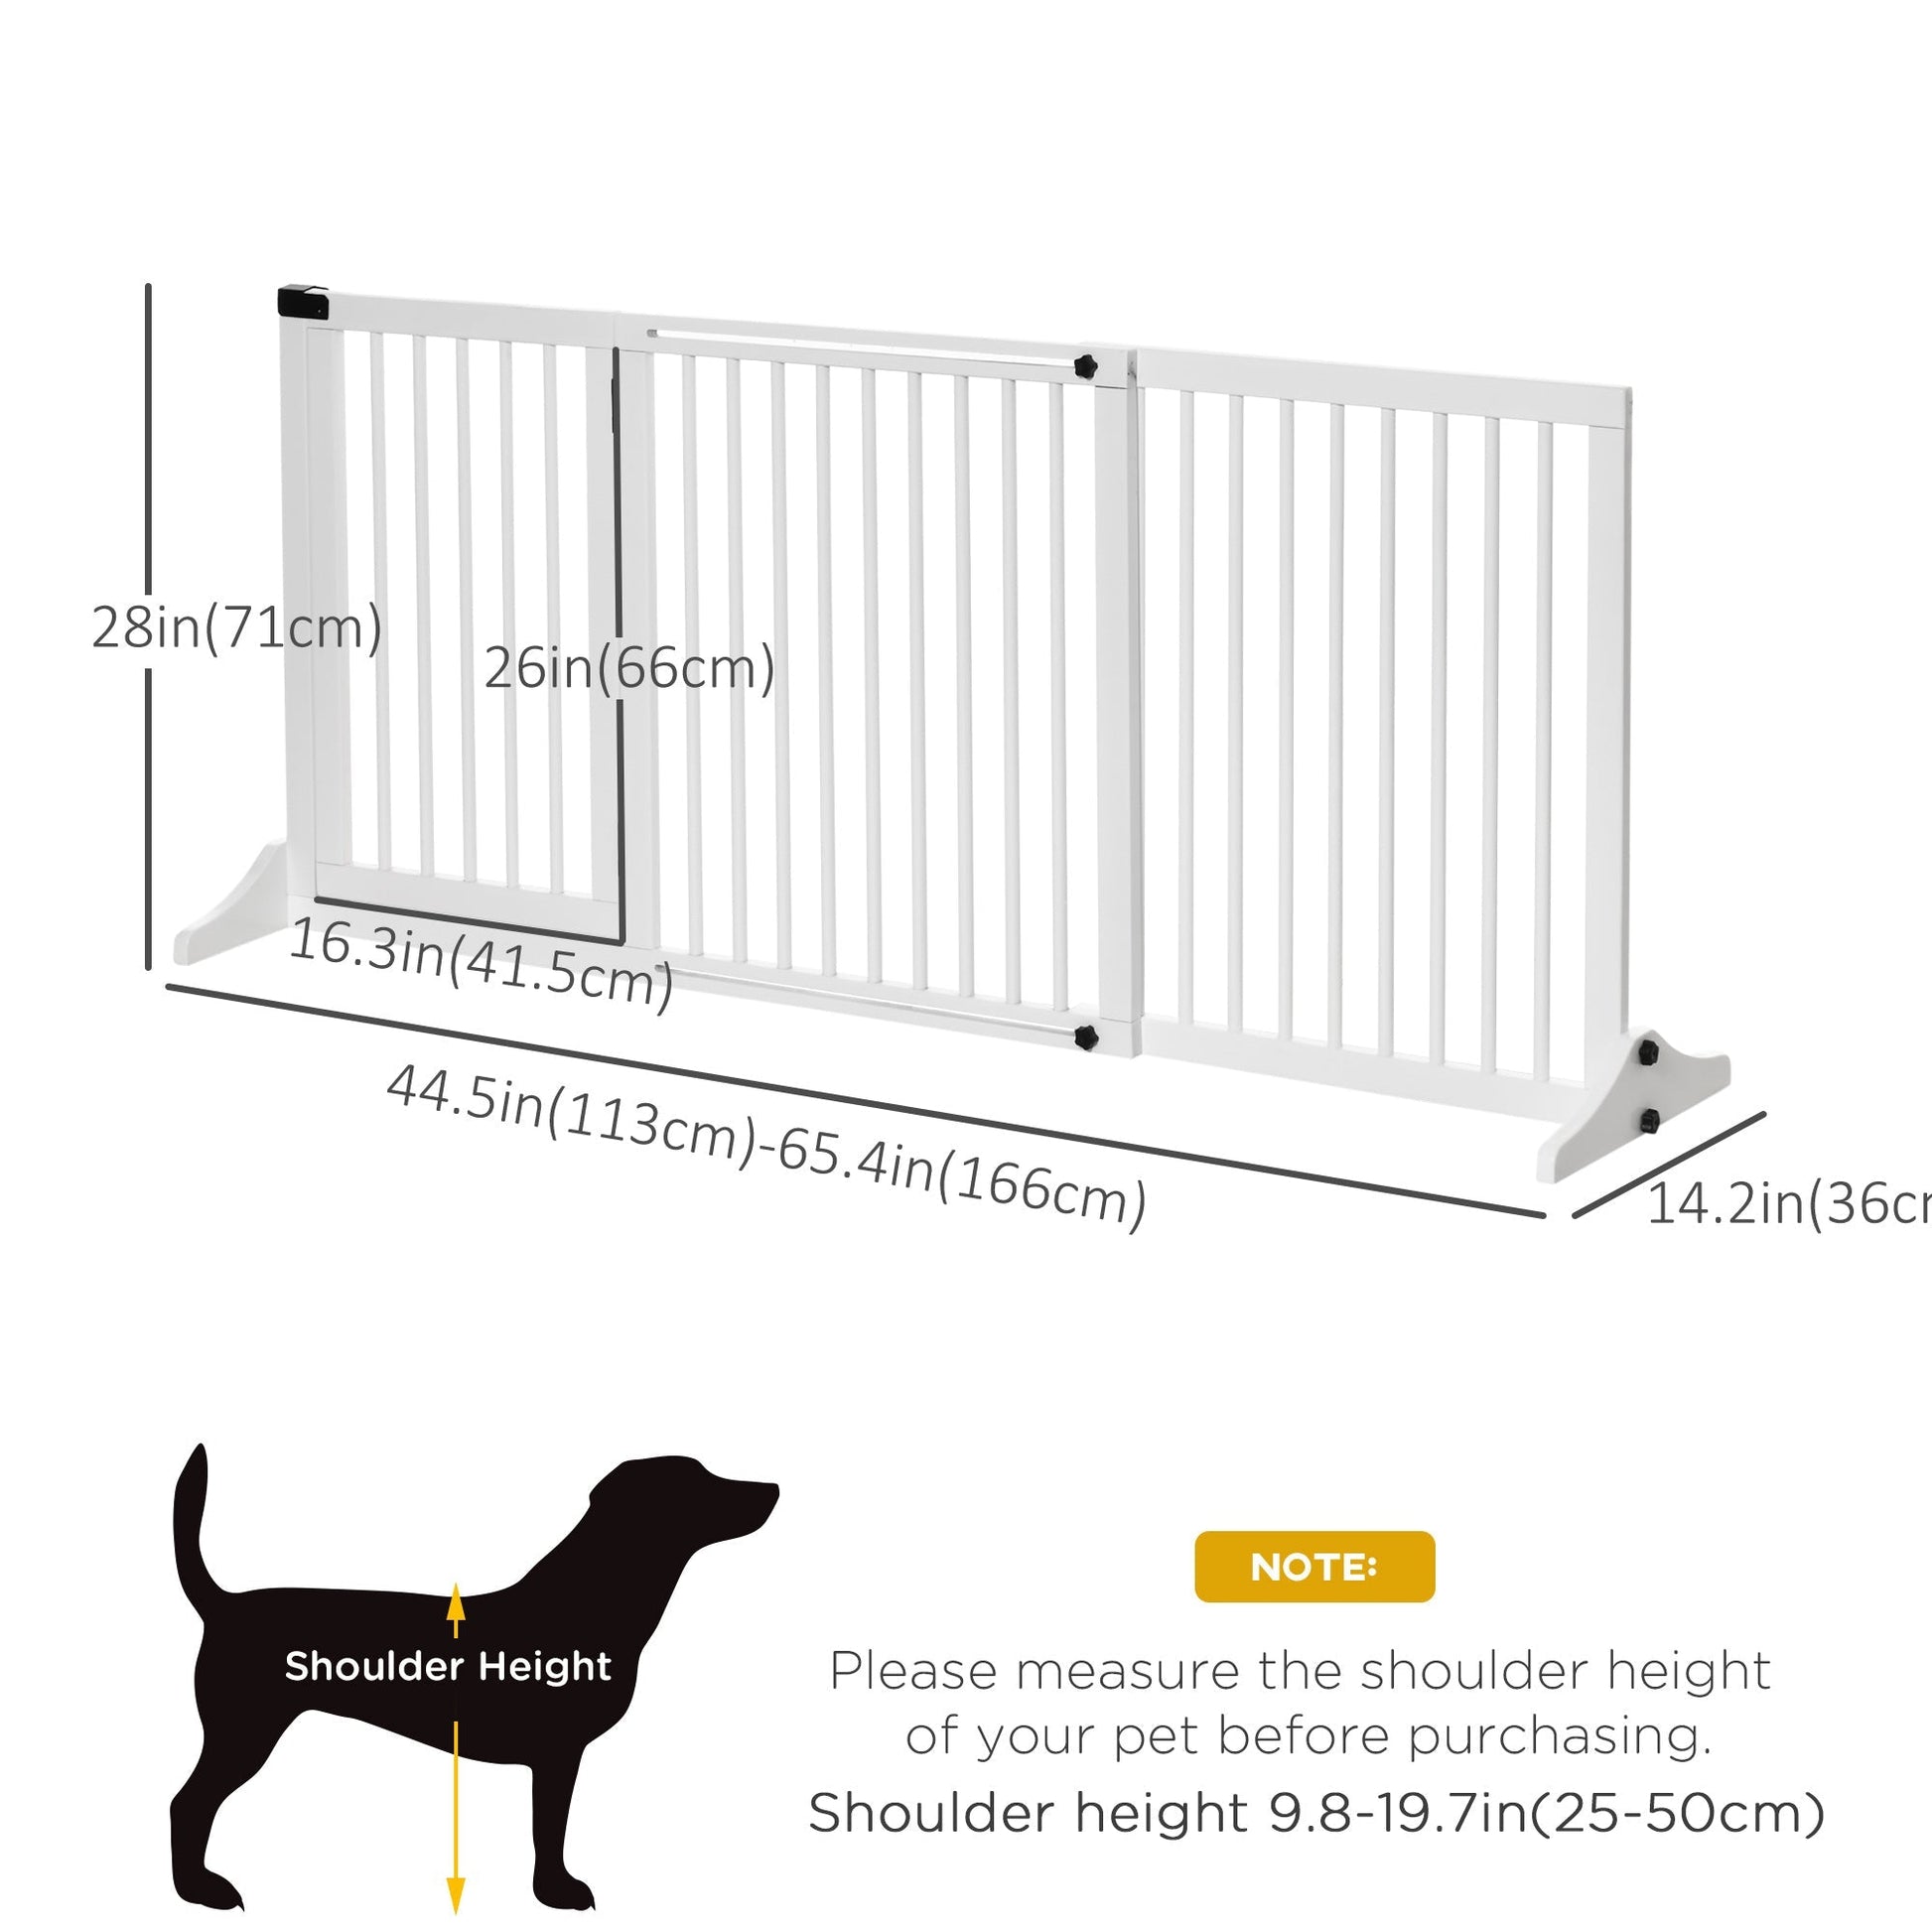 Freestanding Length Adjustable Wooden Pet Gate with Lockable Door 3 Panels, White at Gallery Canada